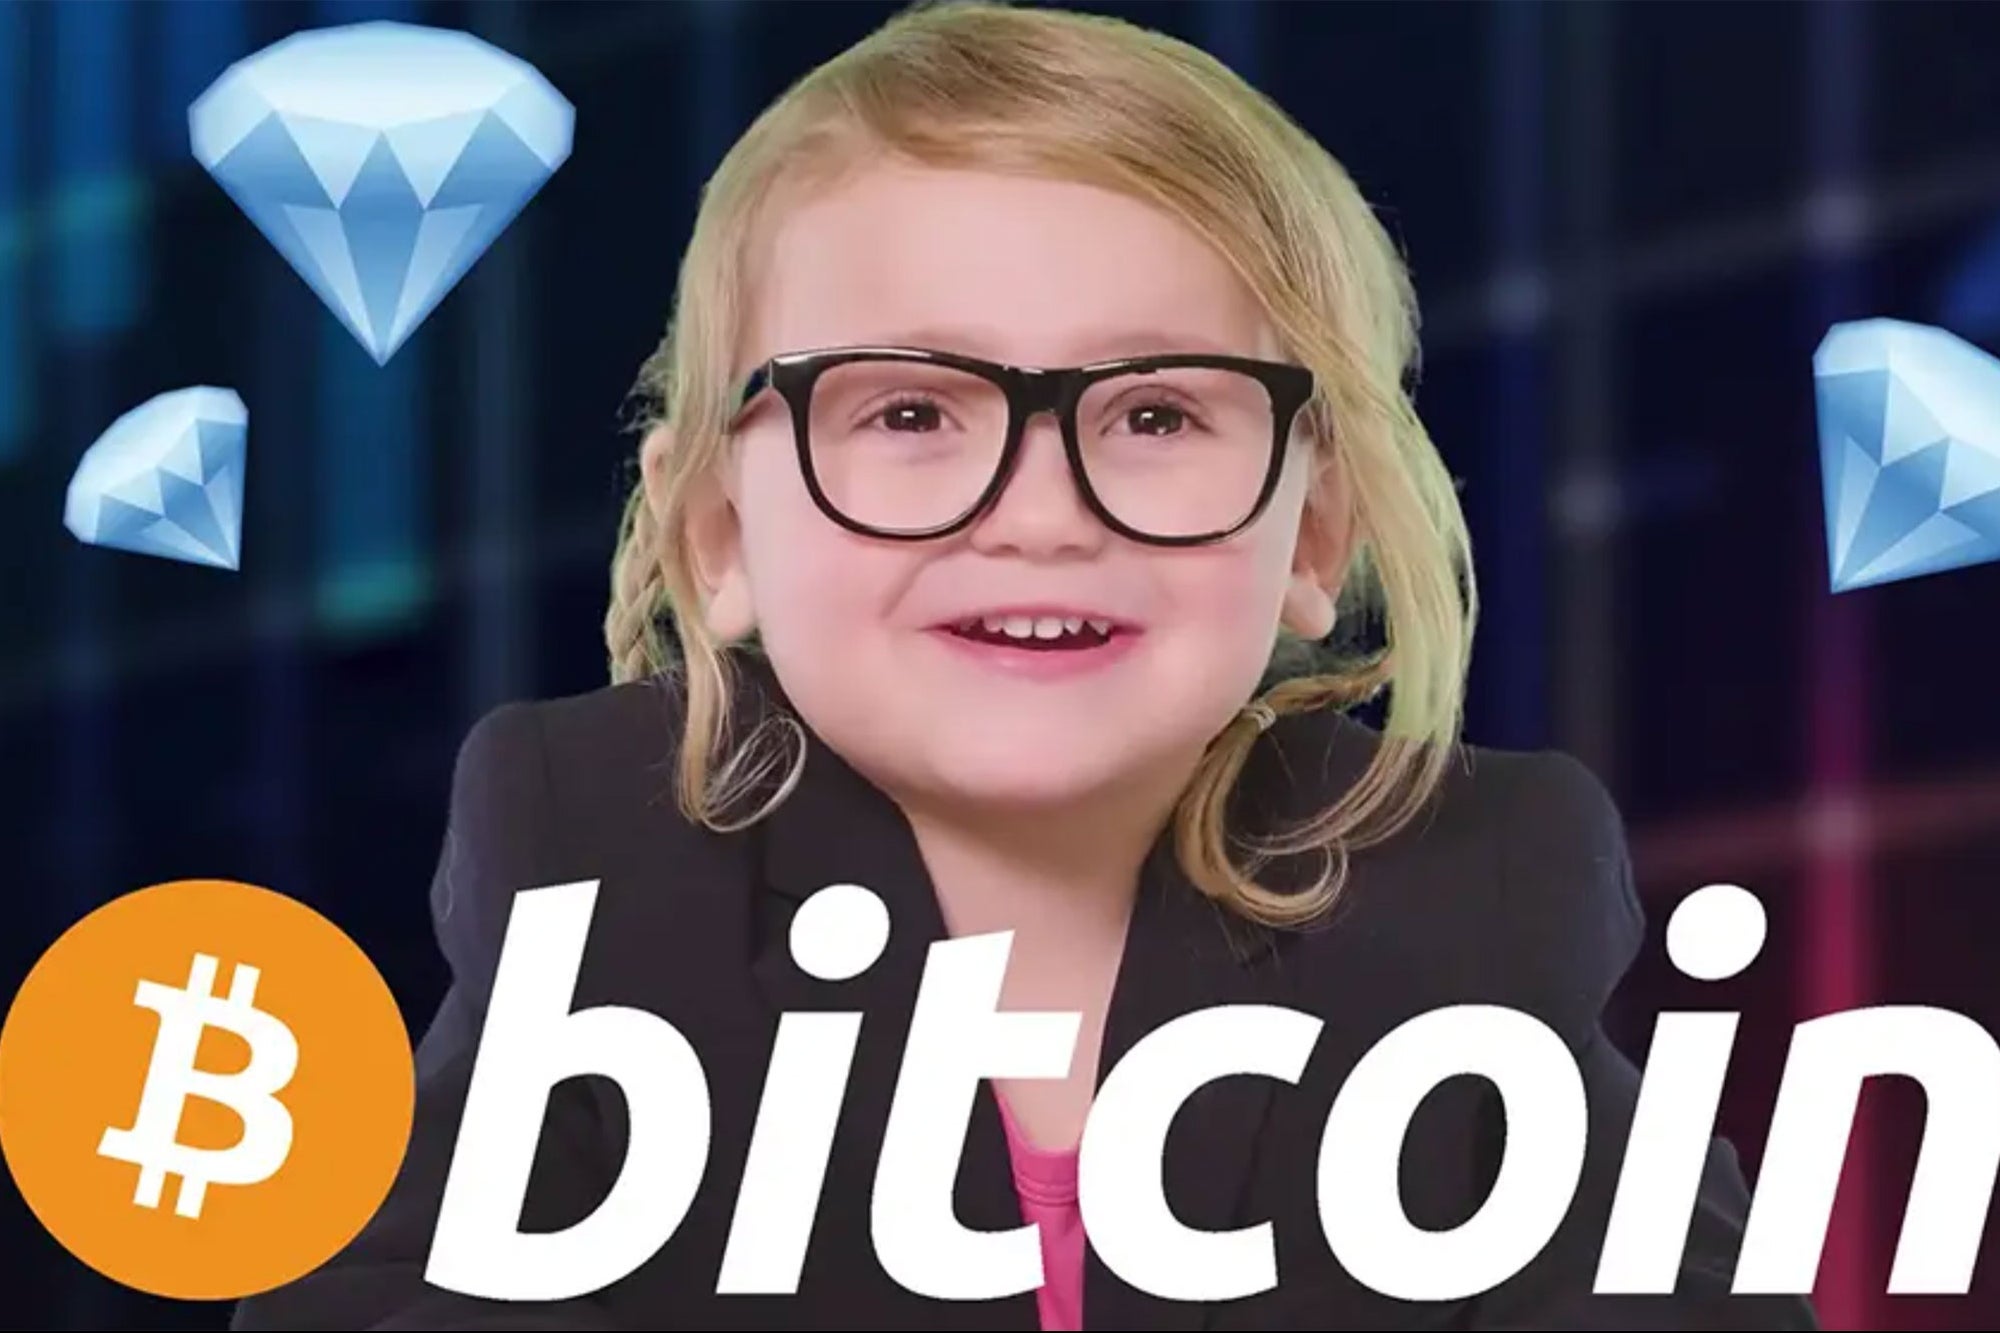 Meet Lily, the 3-Year-Old Girl Who Explains How Bitcoin Works With Sweets